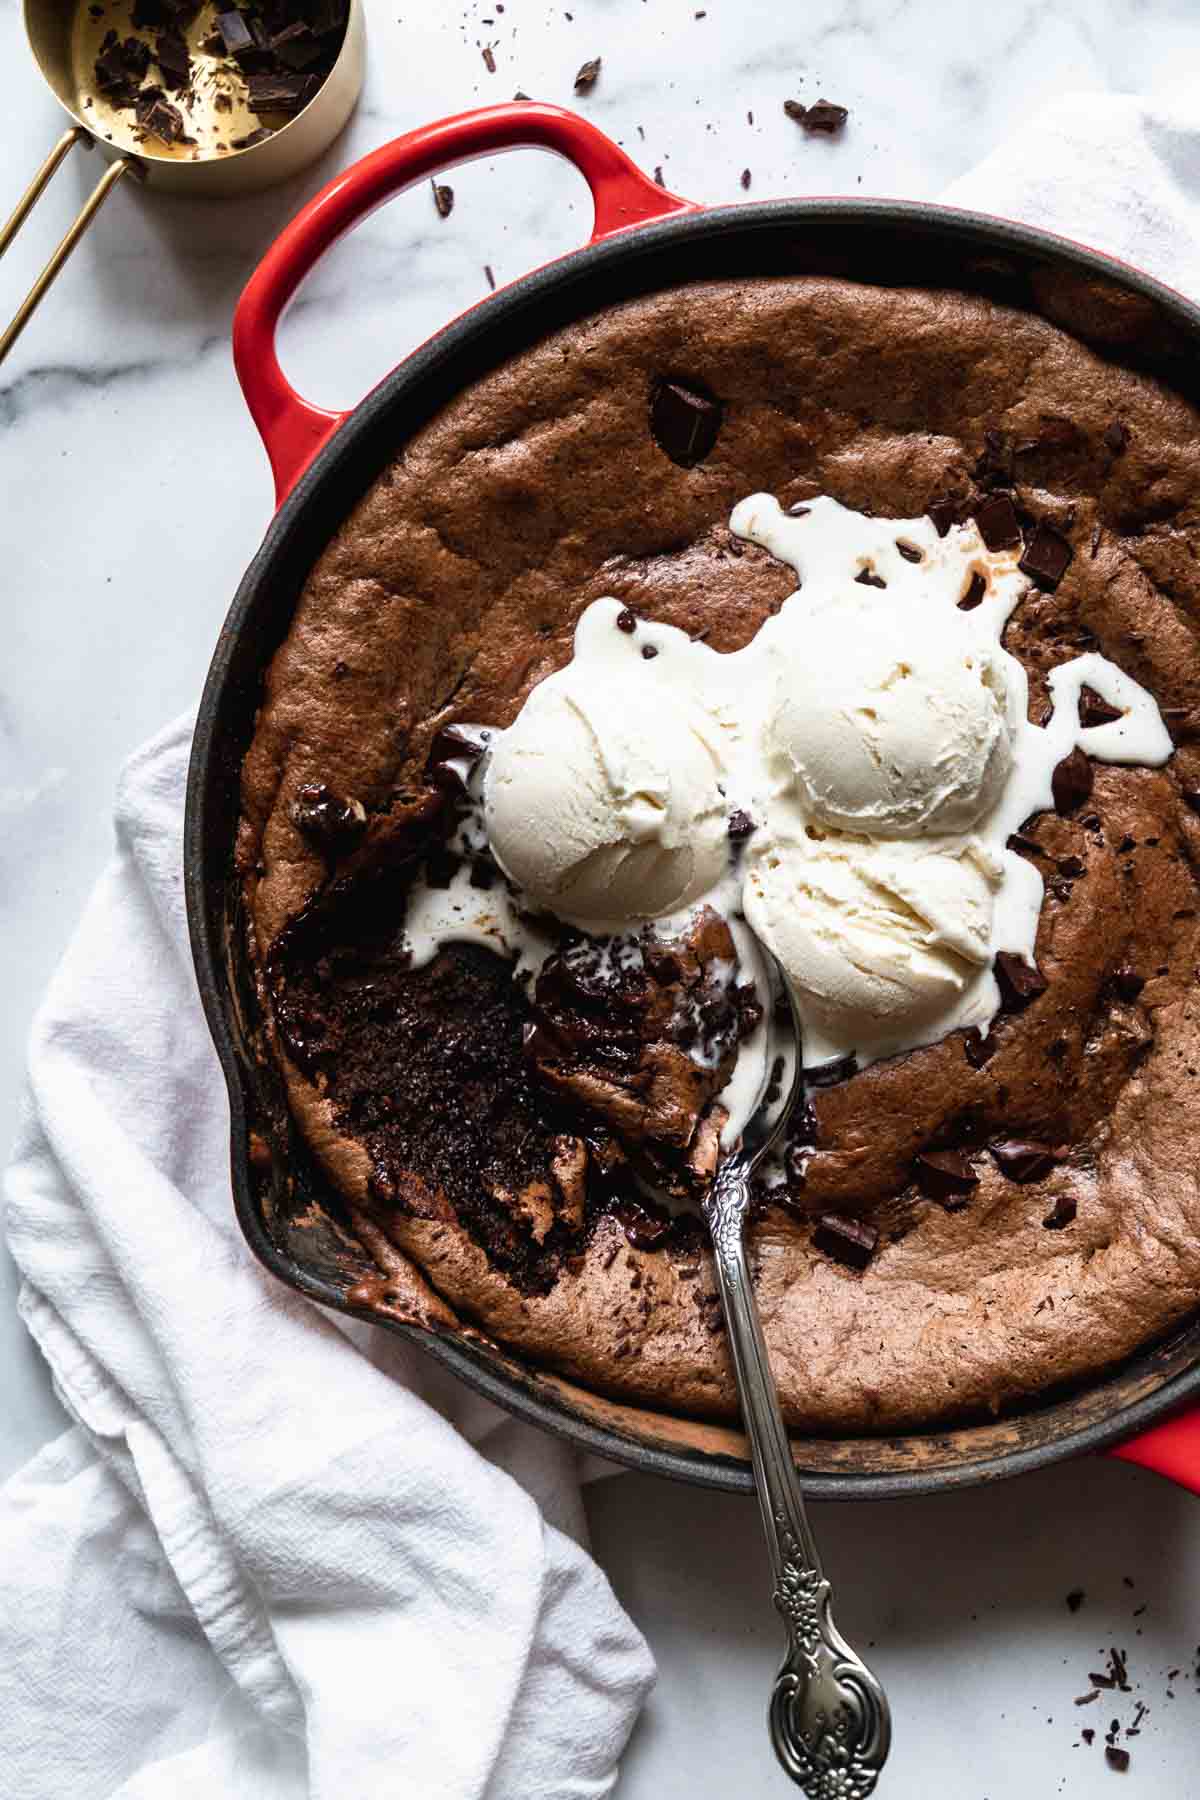 Almond Butter Skillet Brownie - fudgy and rich, but completely flourless and gluten-free!